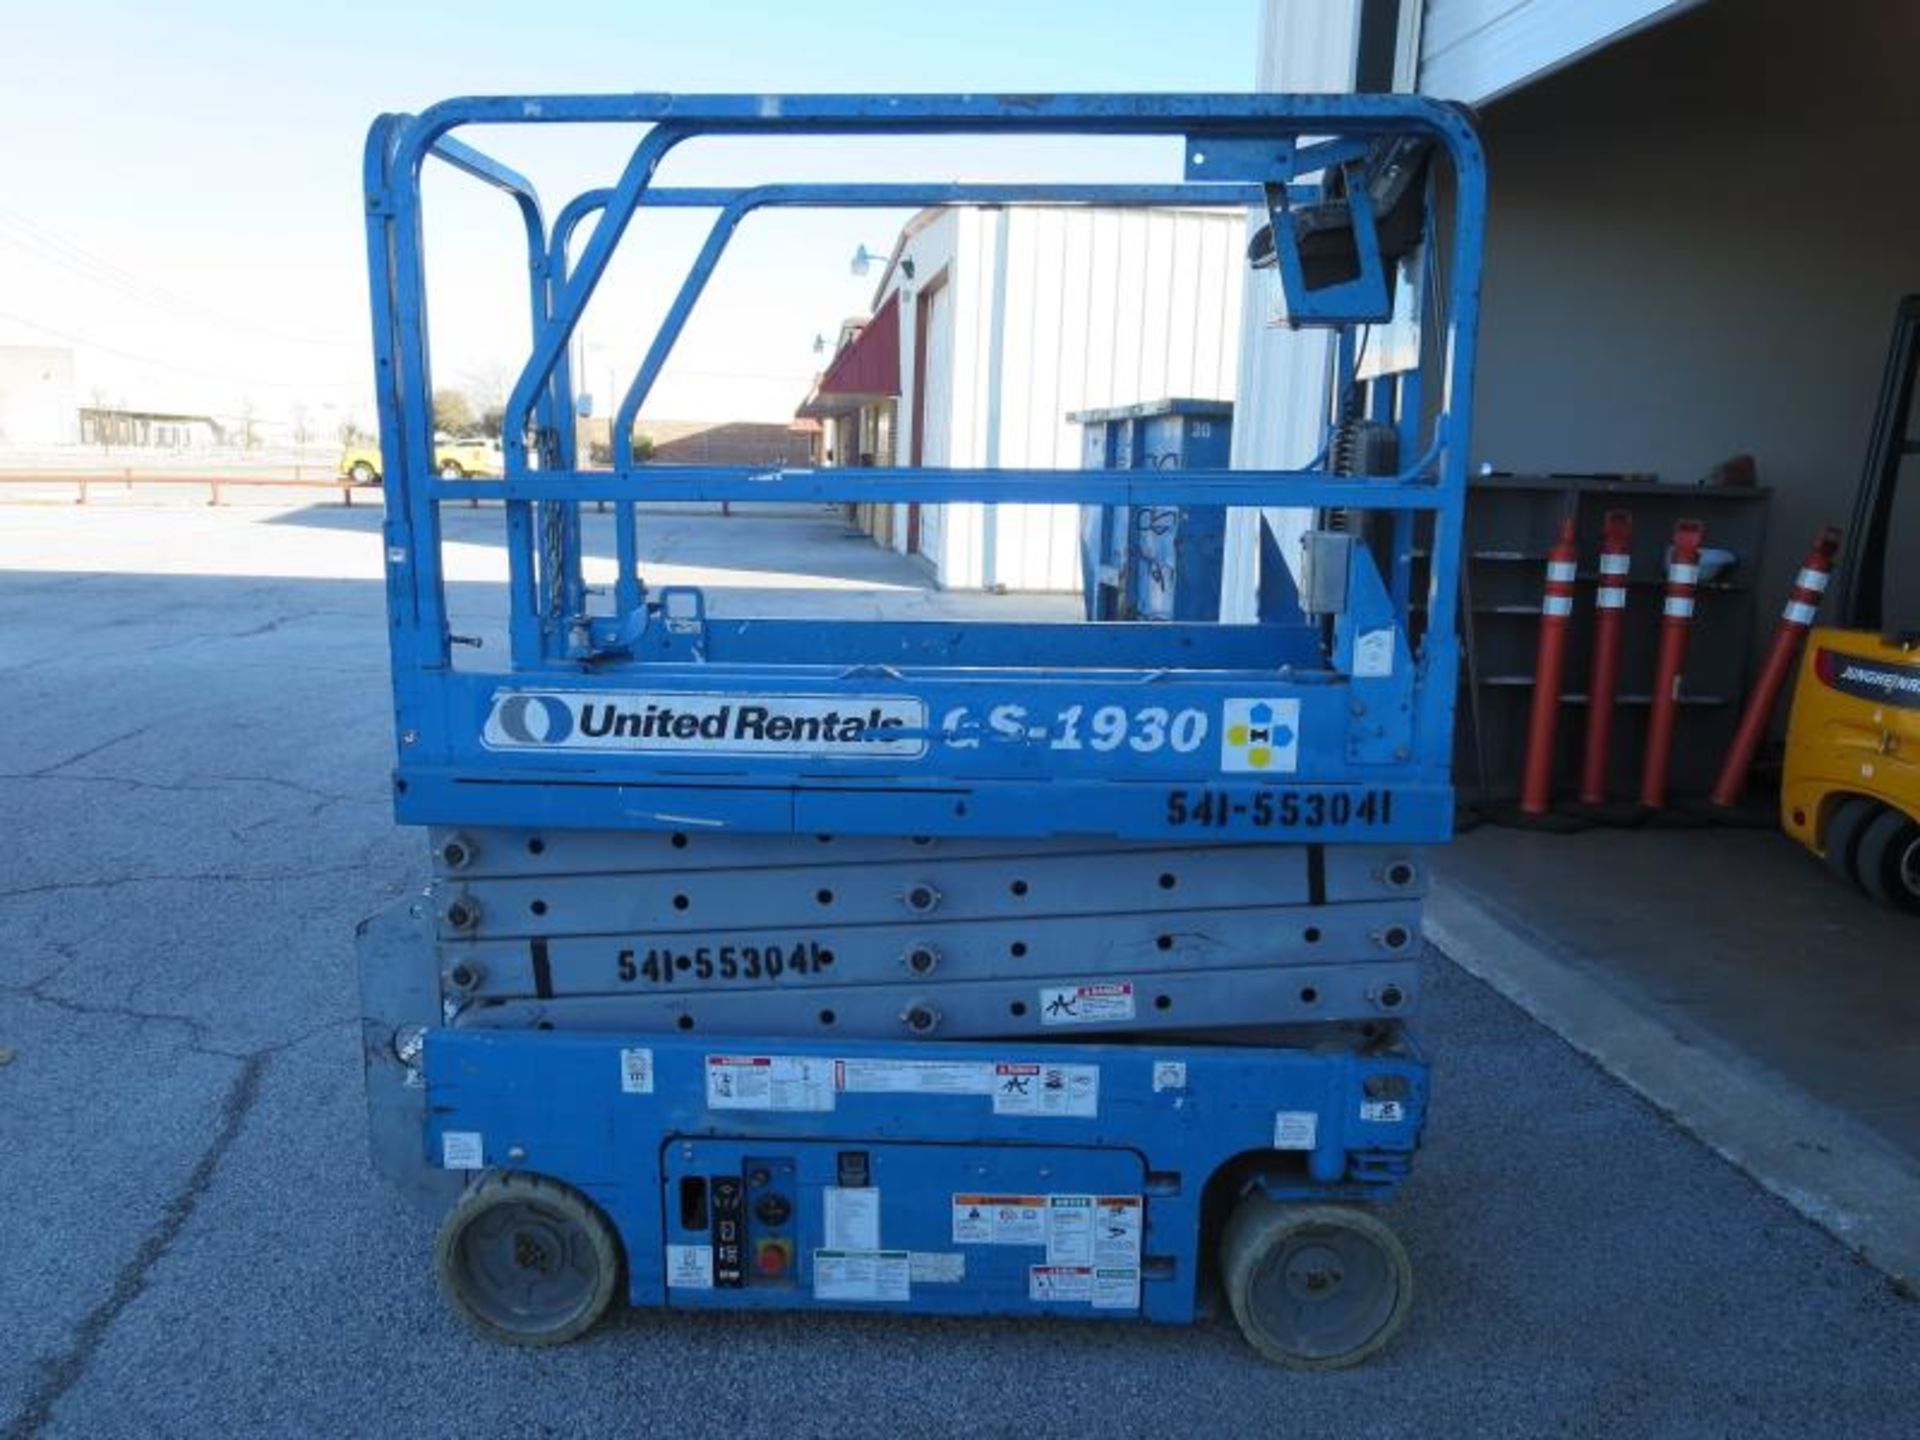 Genie GS-1930 Scissor Lift, 500 lb. capacity, Platform Max. Height 15ft. Max working height 21ft. - Image 8 of 10